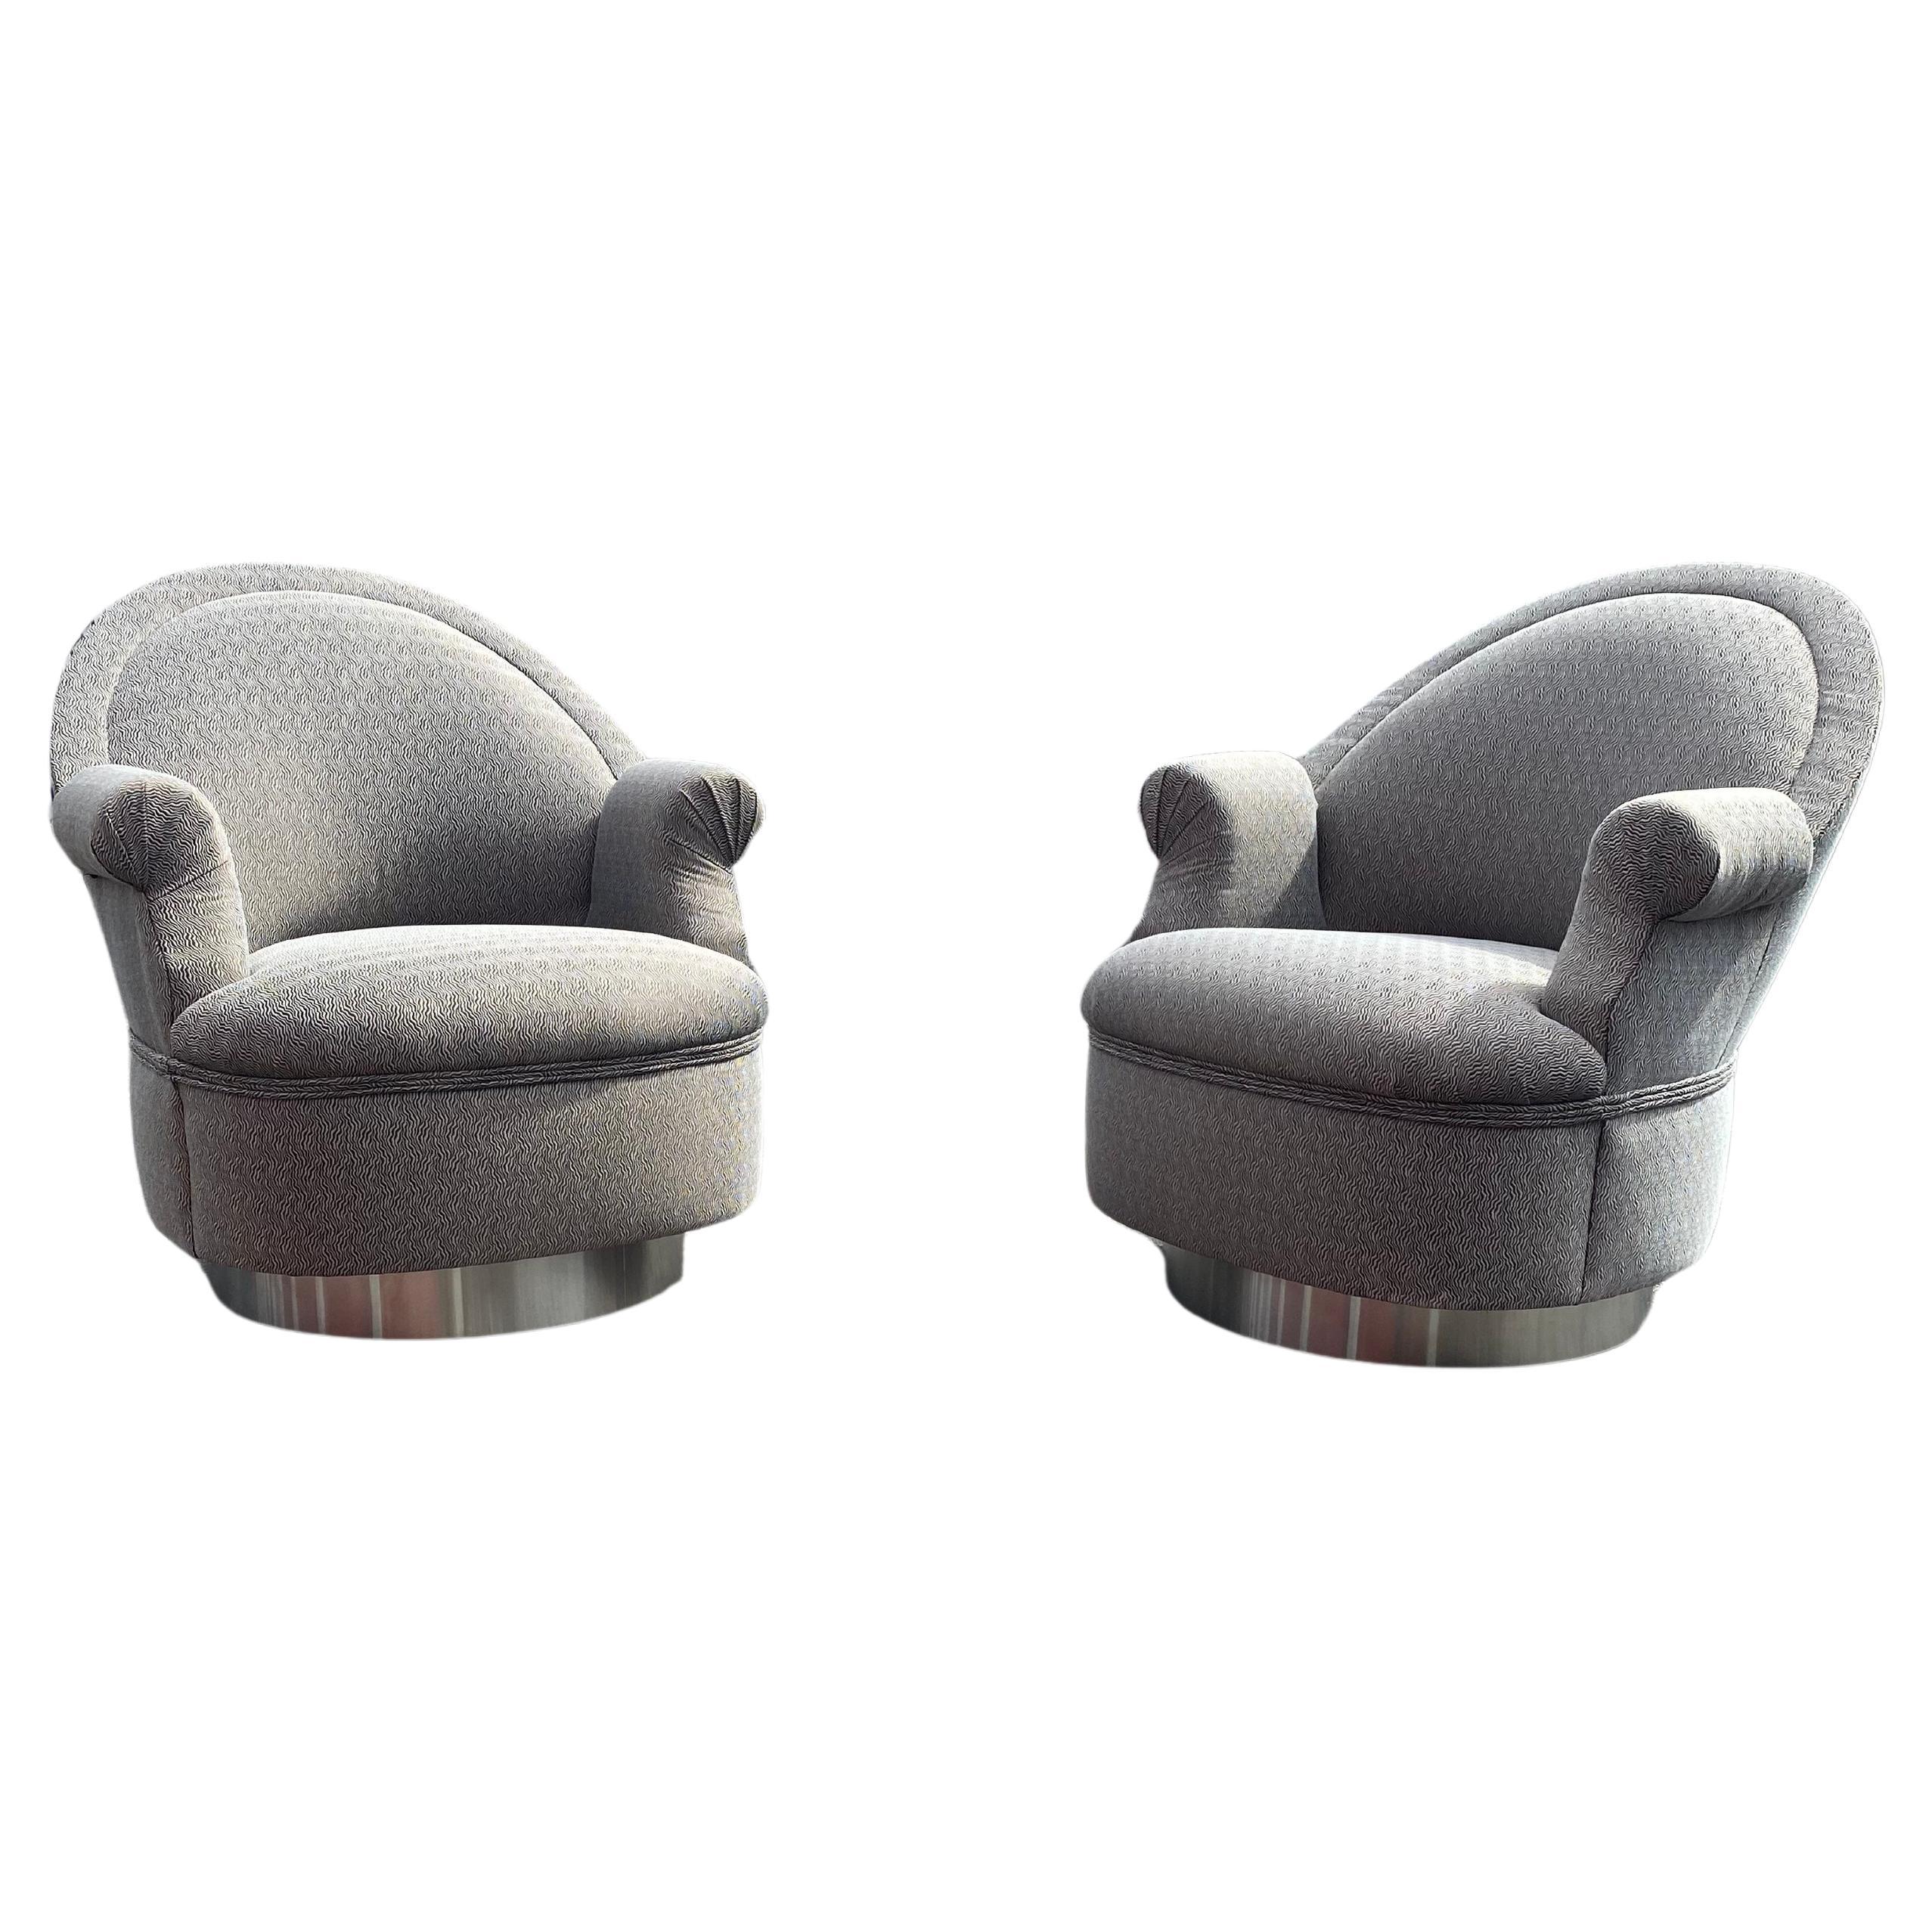 1980s Milo Baughman Rolling Swivel Chairs, Set of 2 For Sale